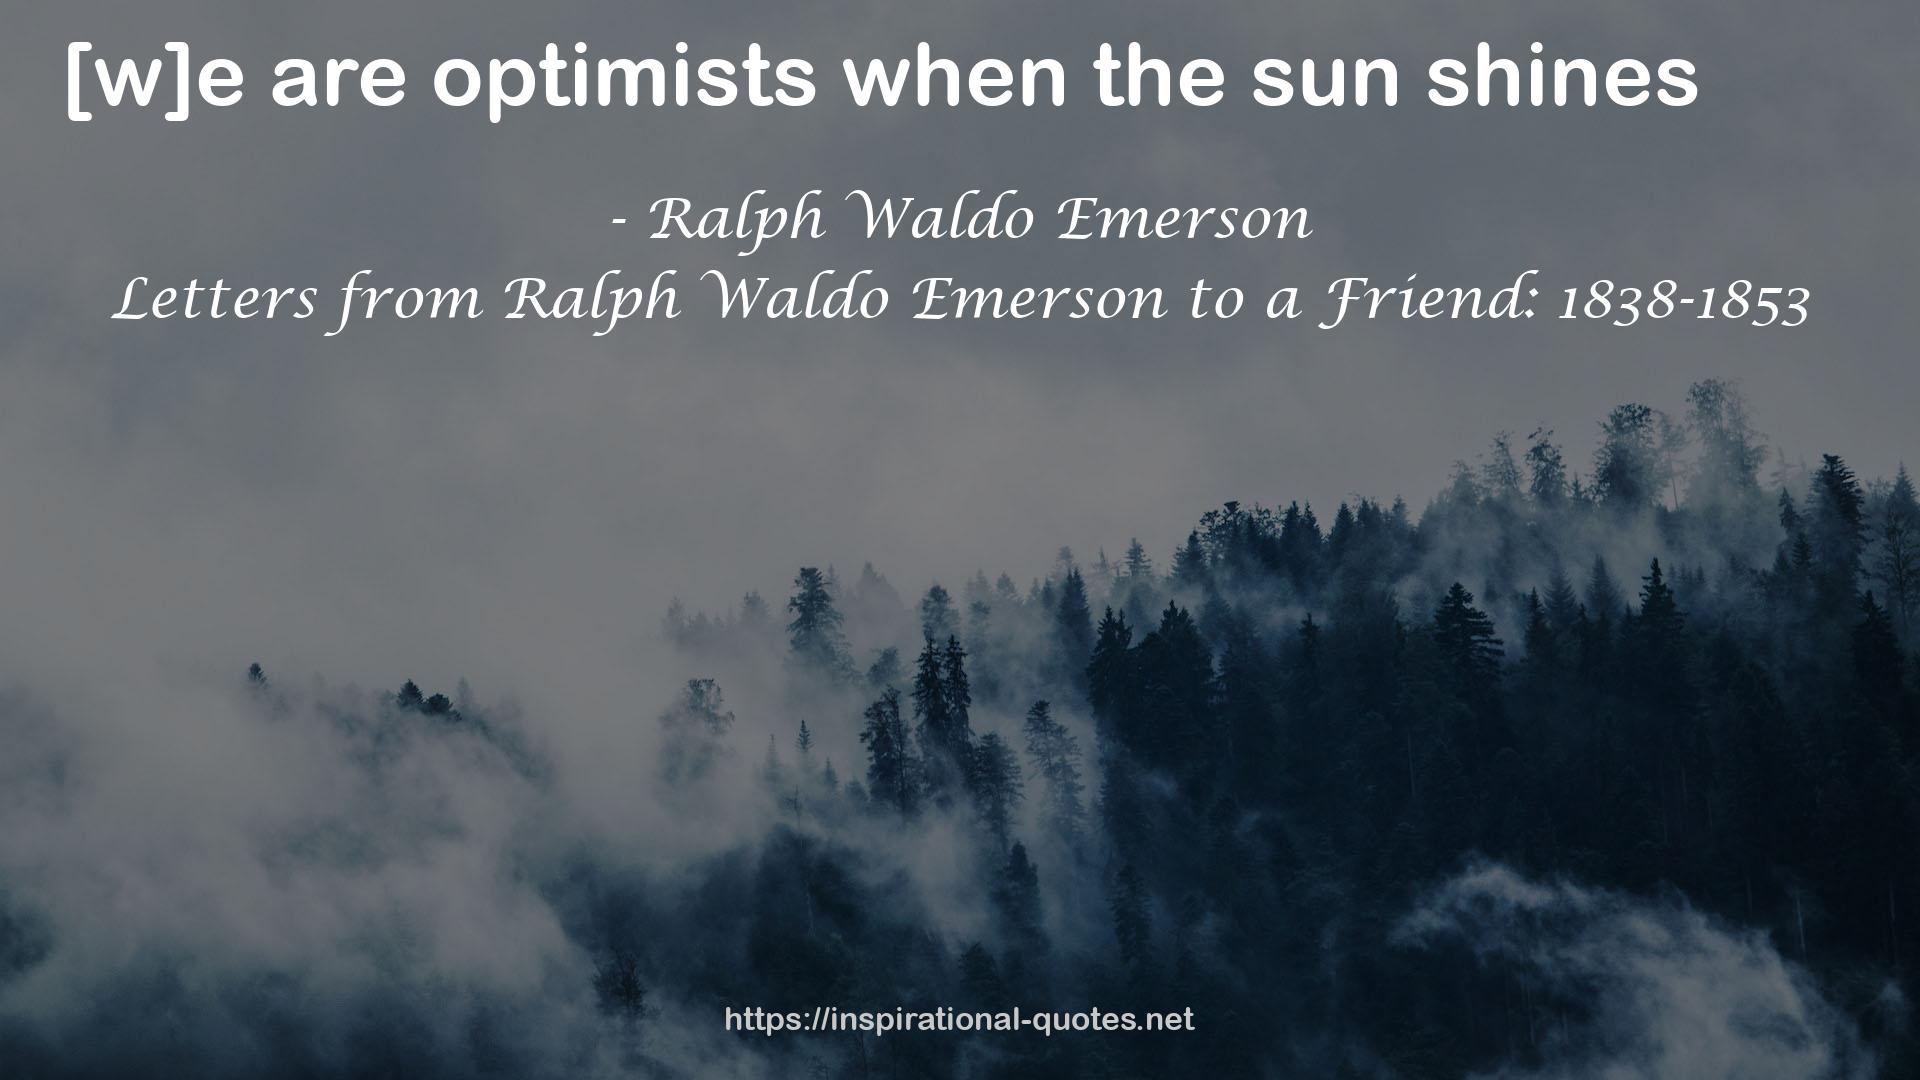 Letters from Ralph Waldo Emerson to a Friend: 1838-1853 QUOTES